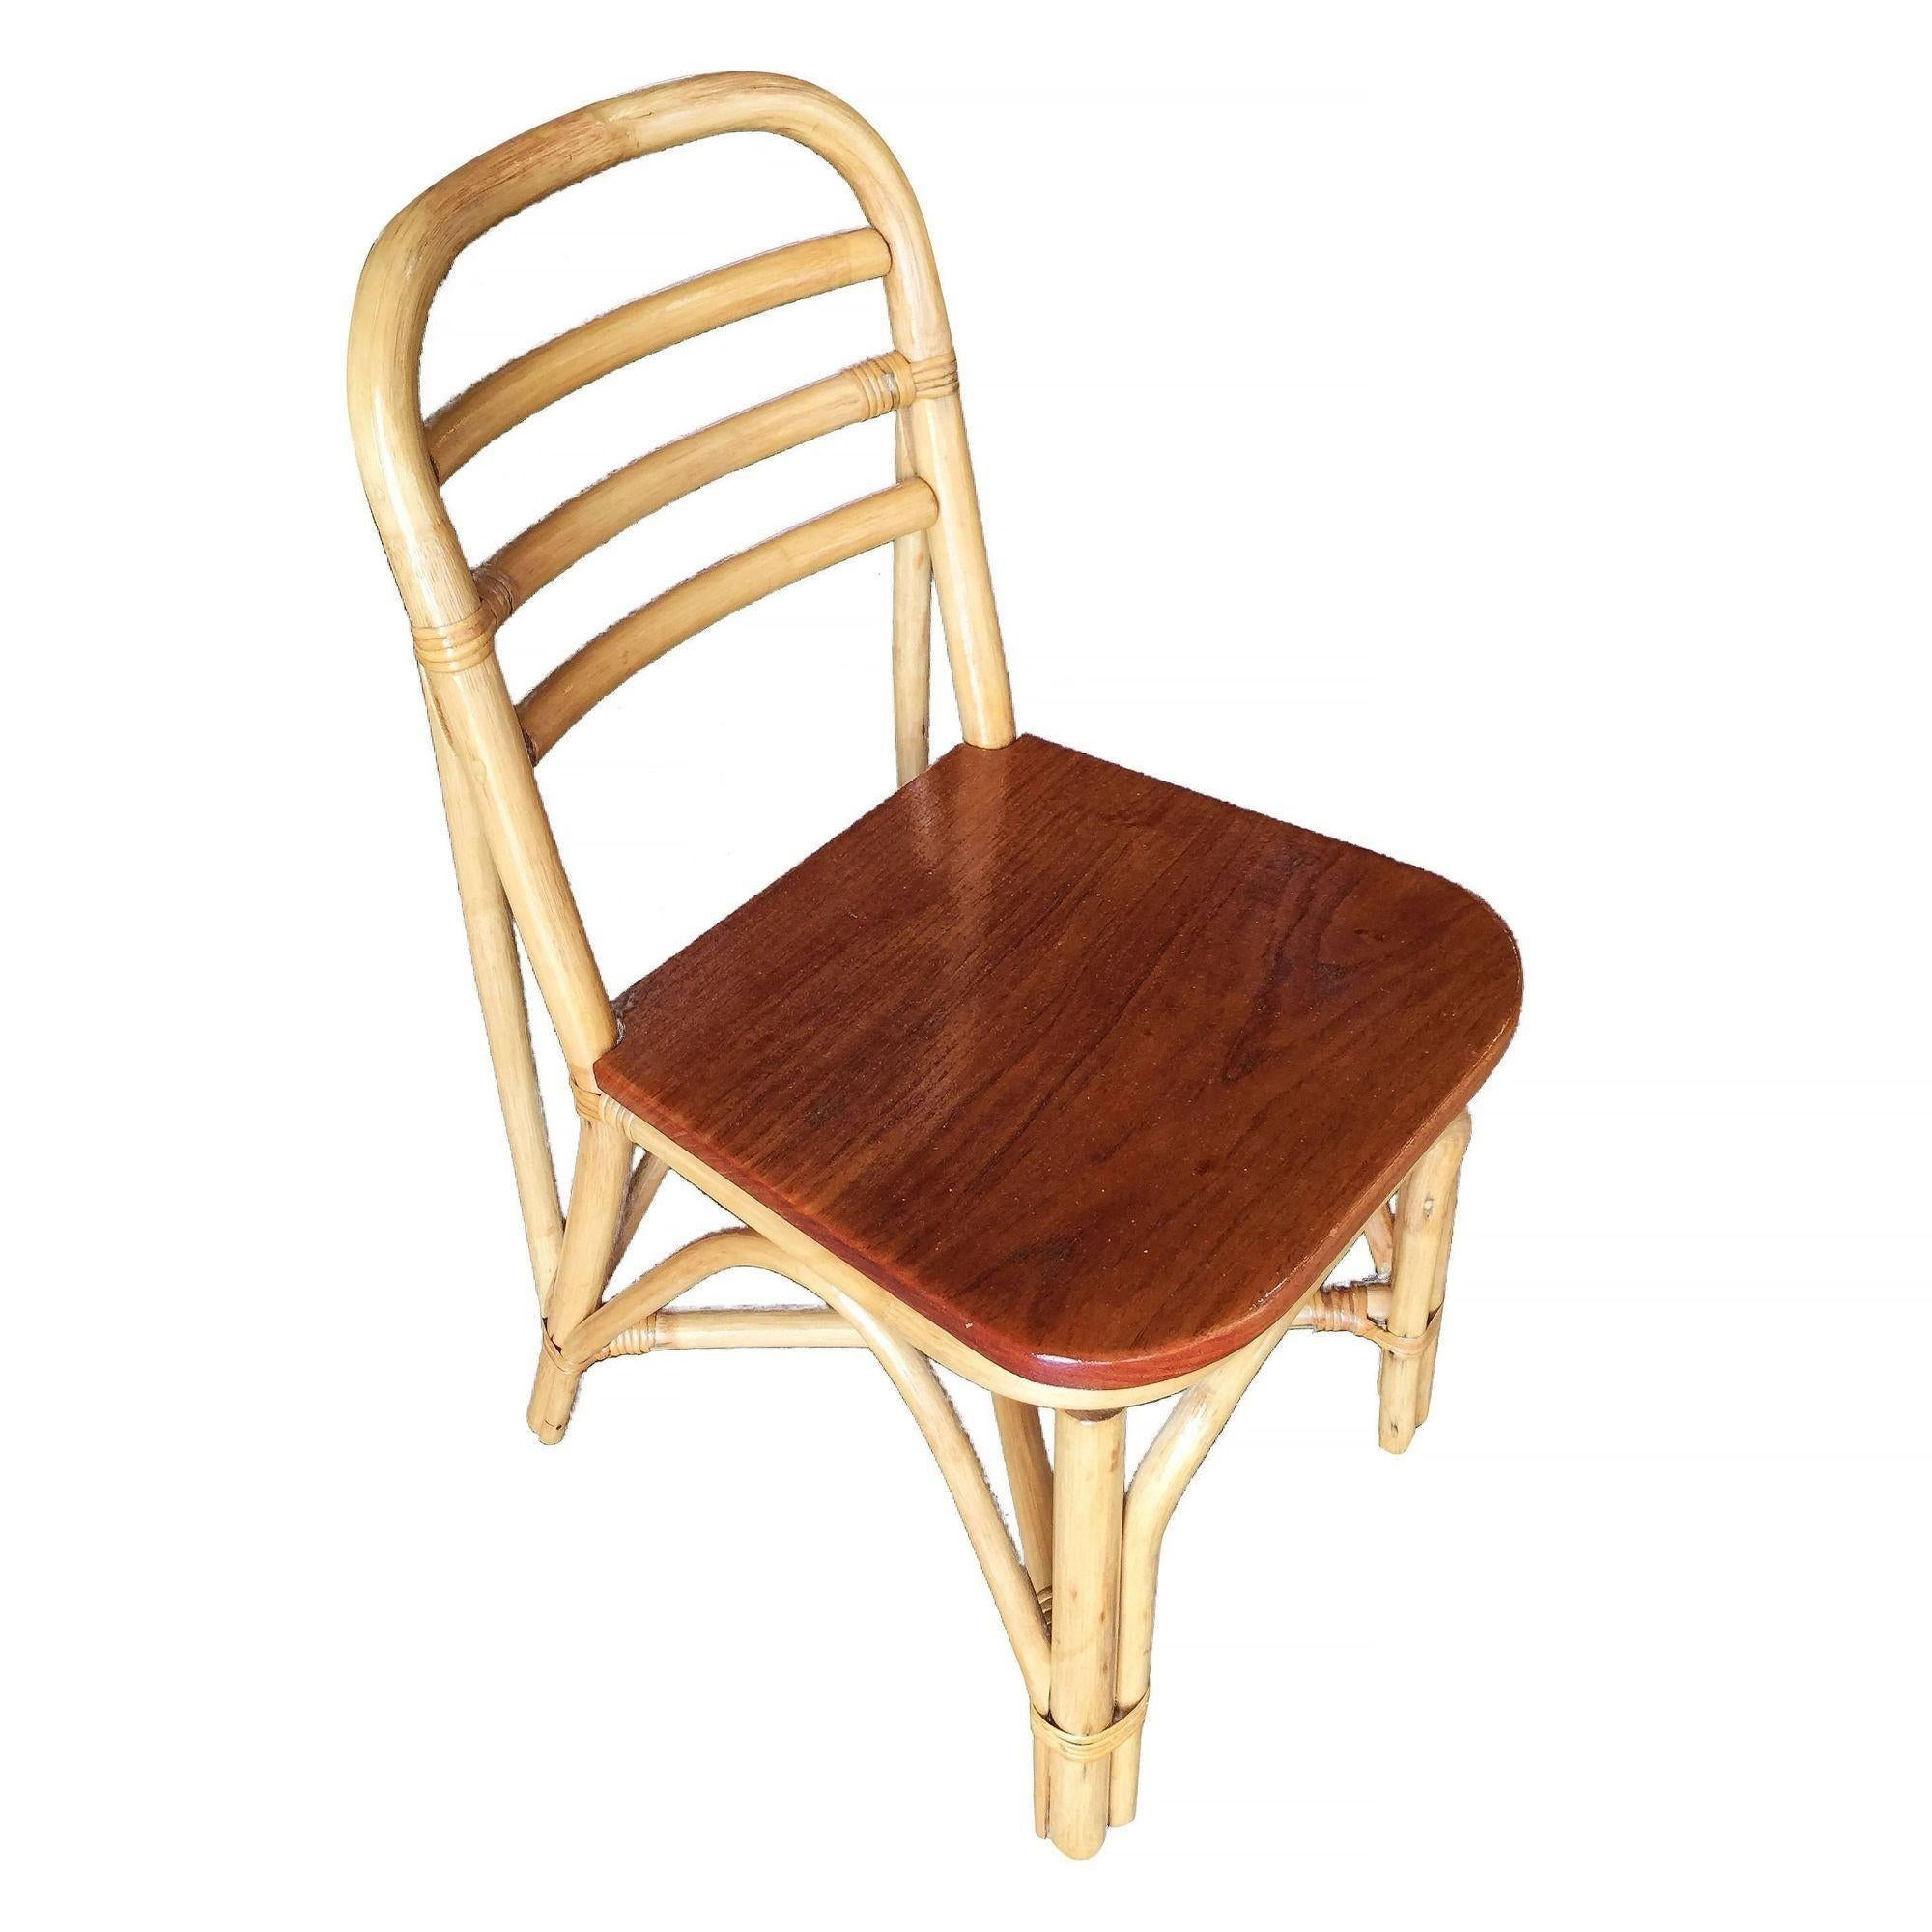 Vintage rattan dining room side chair with a mahogany seat, included is a set of 5-chairs. Each chair features a three-strand rattan seat back with a mahogany seat.
We only purchase and sell only the best and finest rattan furniture made by the